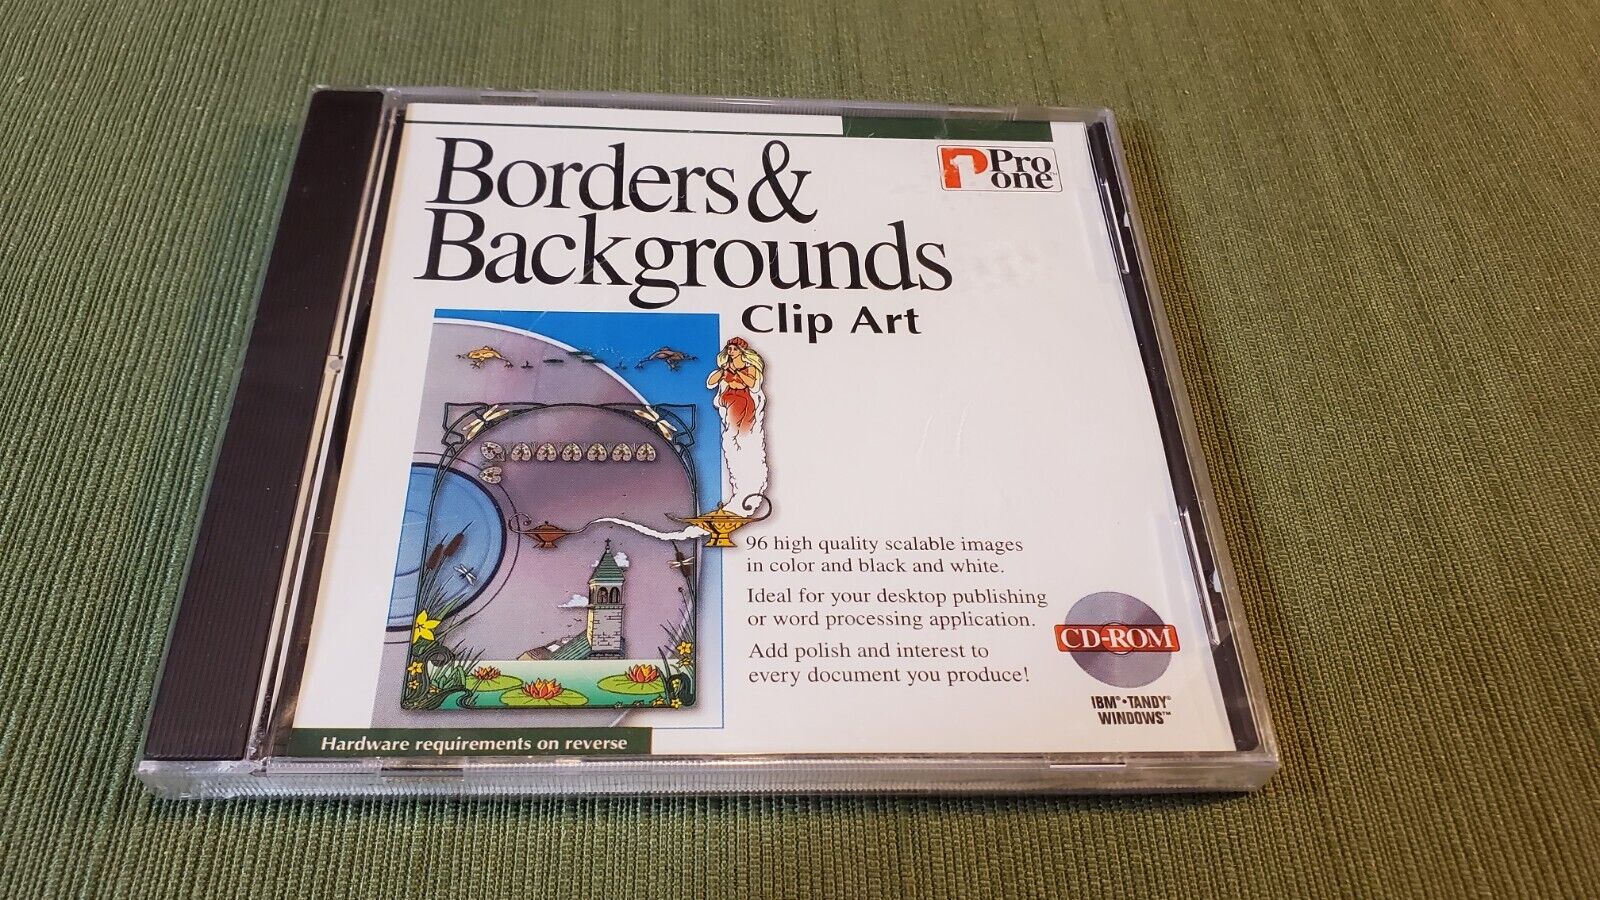 Borders & Backgrounds Clip Art Vintage Software Sealed CD ROM IBM Tandy Windows